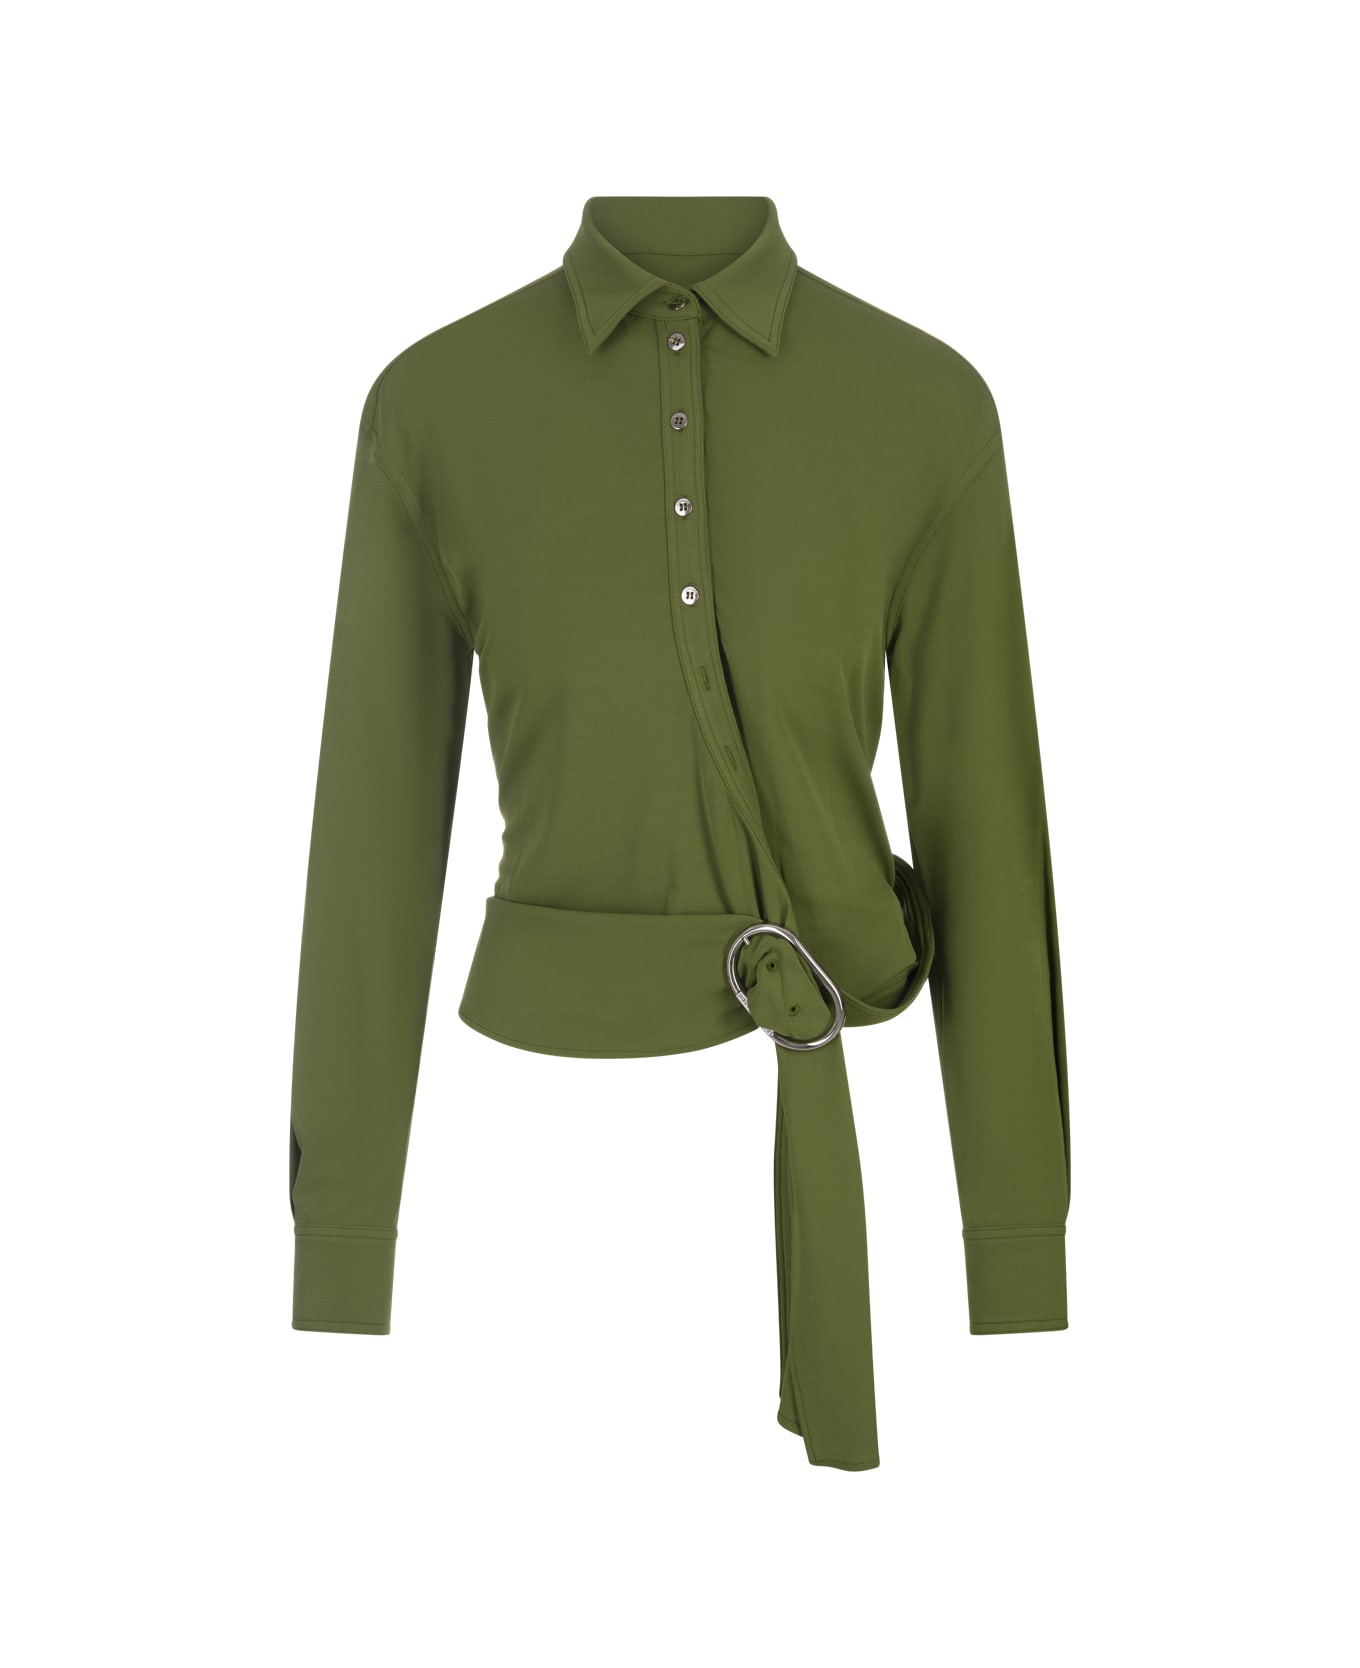 Paco Rabanne Green Draped Top With Piercing Detail - Green